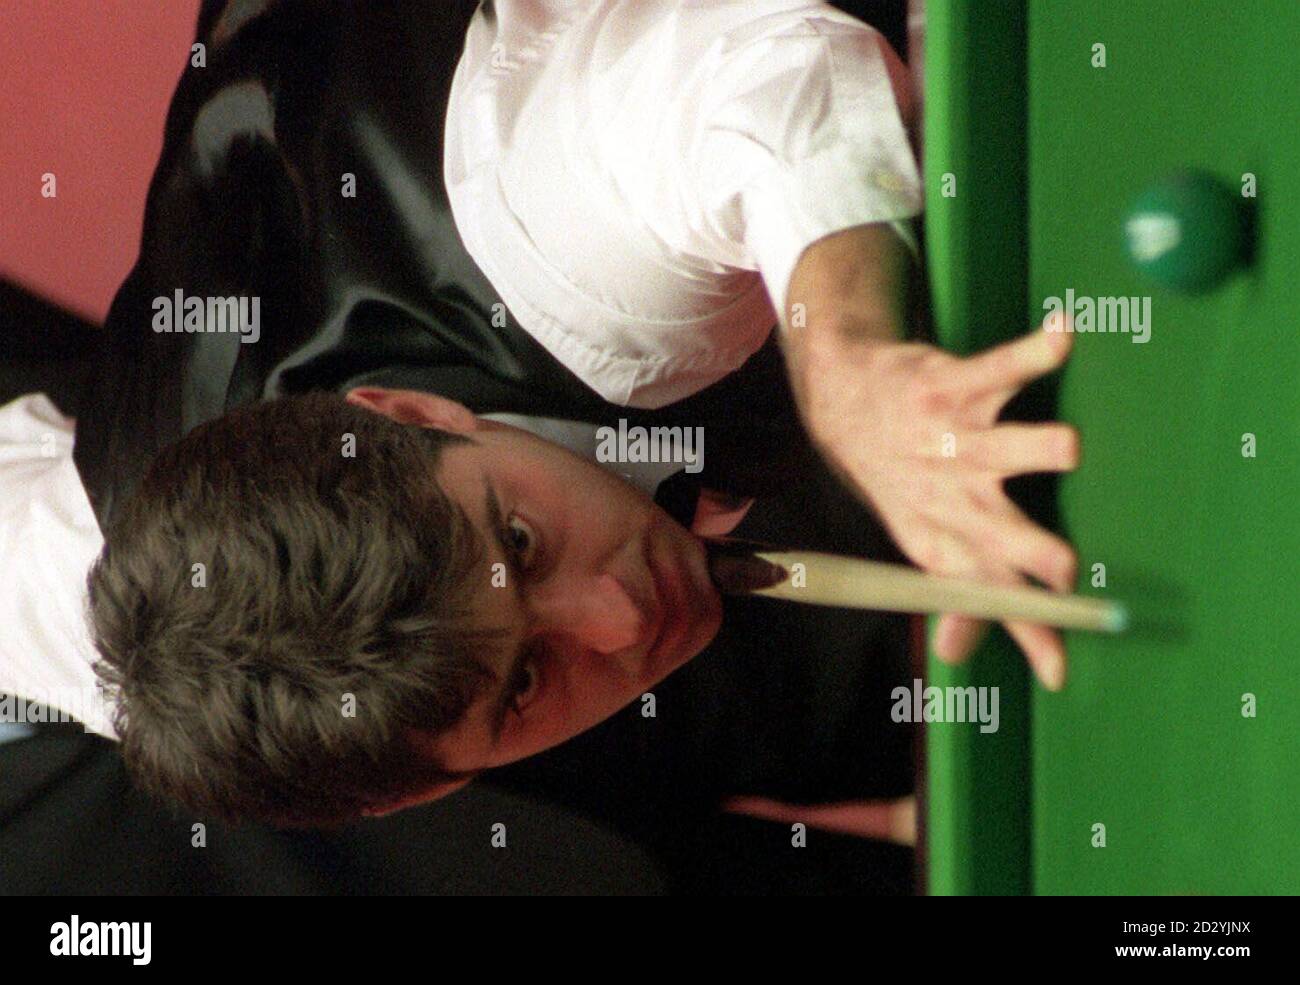 Ronnie OSullivan lines up a shot on his way to a substantial lead over Jimmy White in their Quarter Final Match in the Embassy World Snooker Championships today (Tuesday)